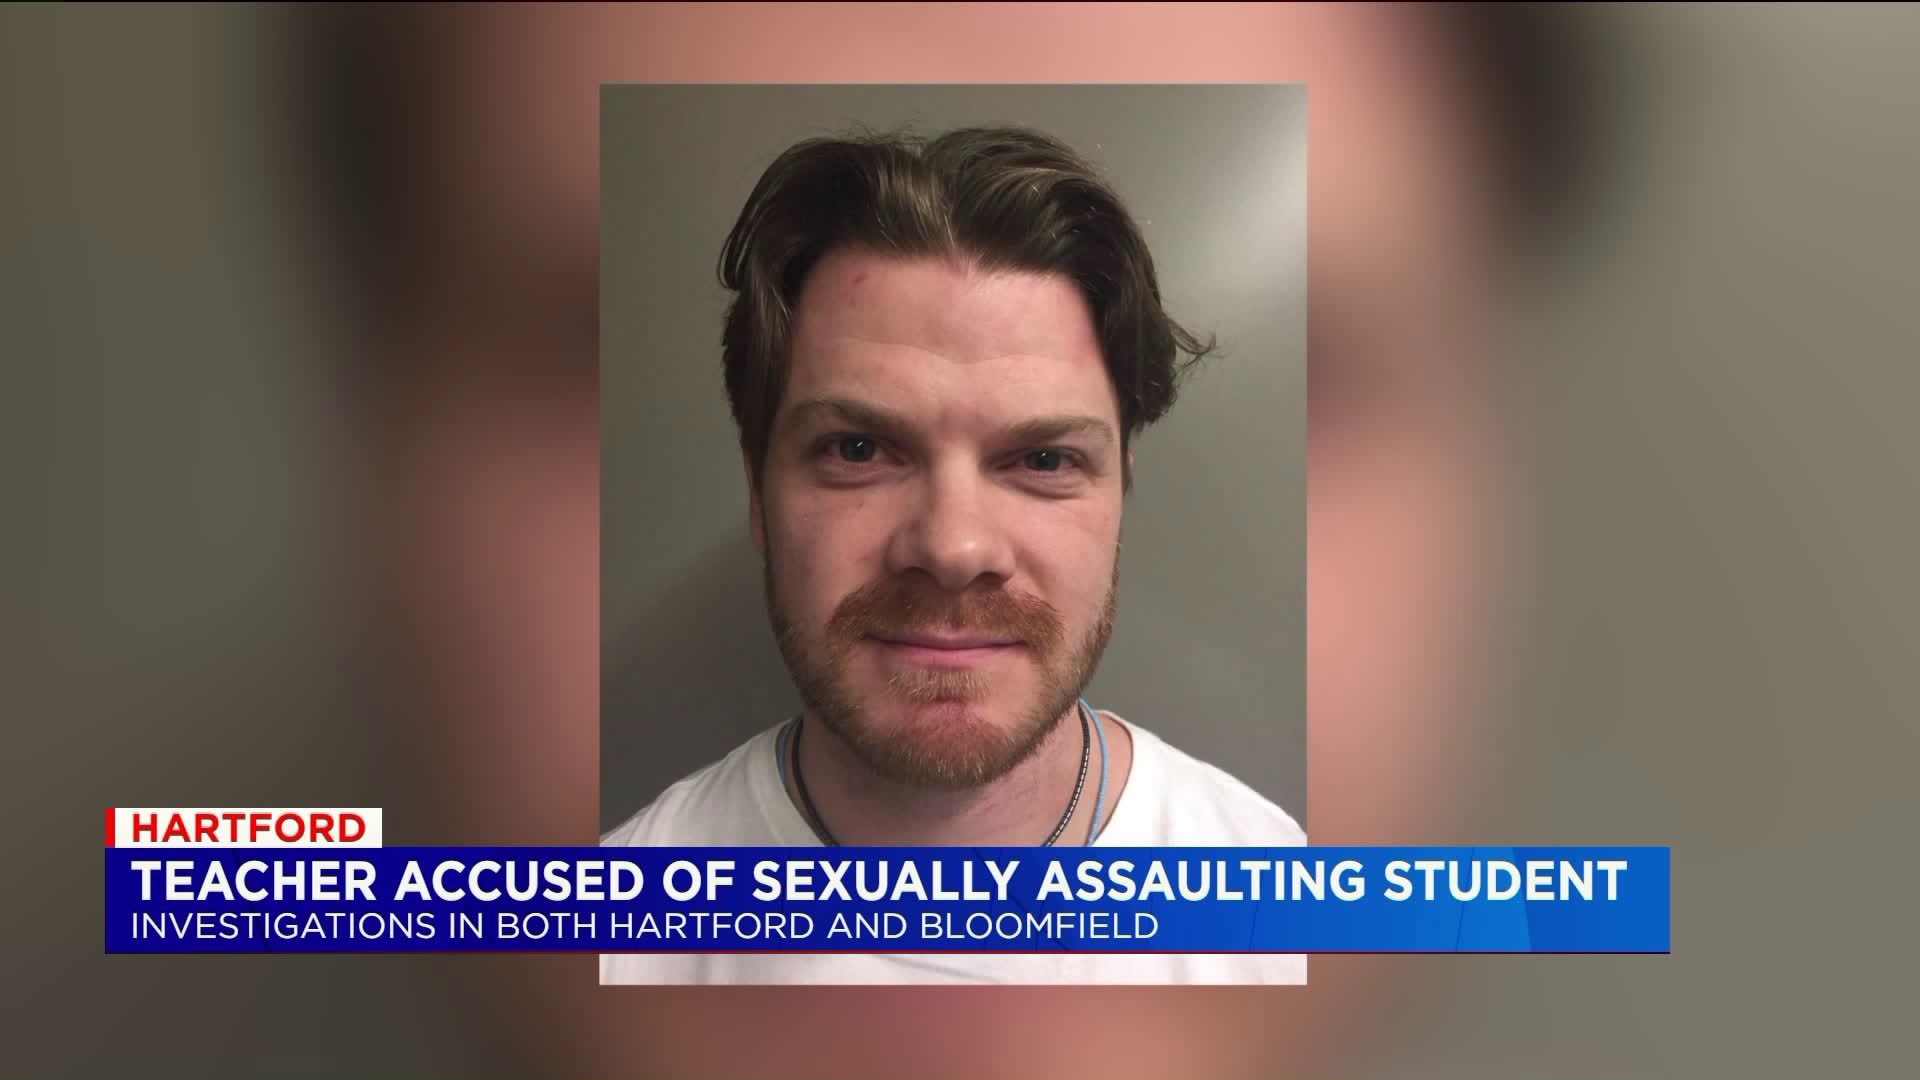 Hartford teacher accused of sexually assaulting student